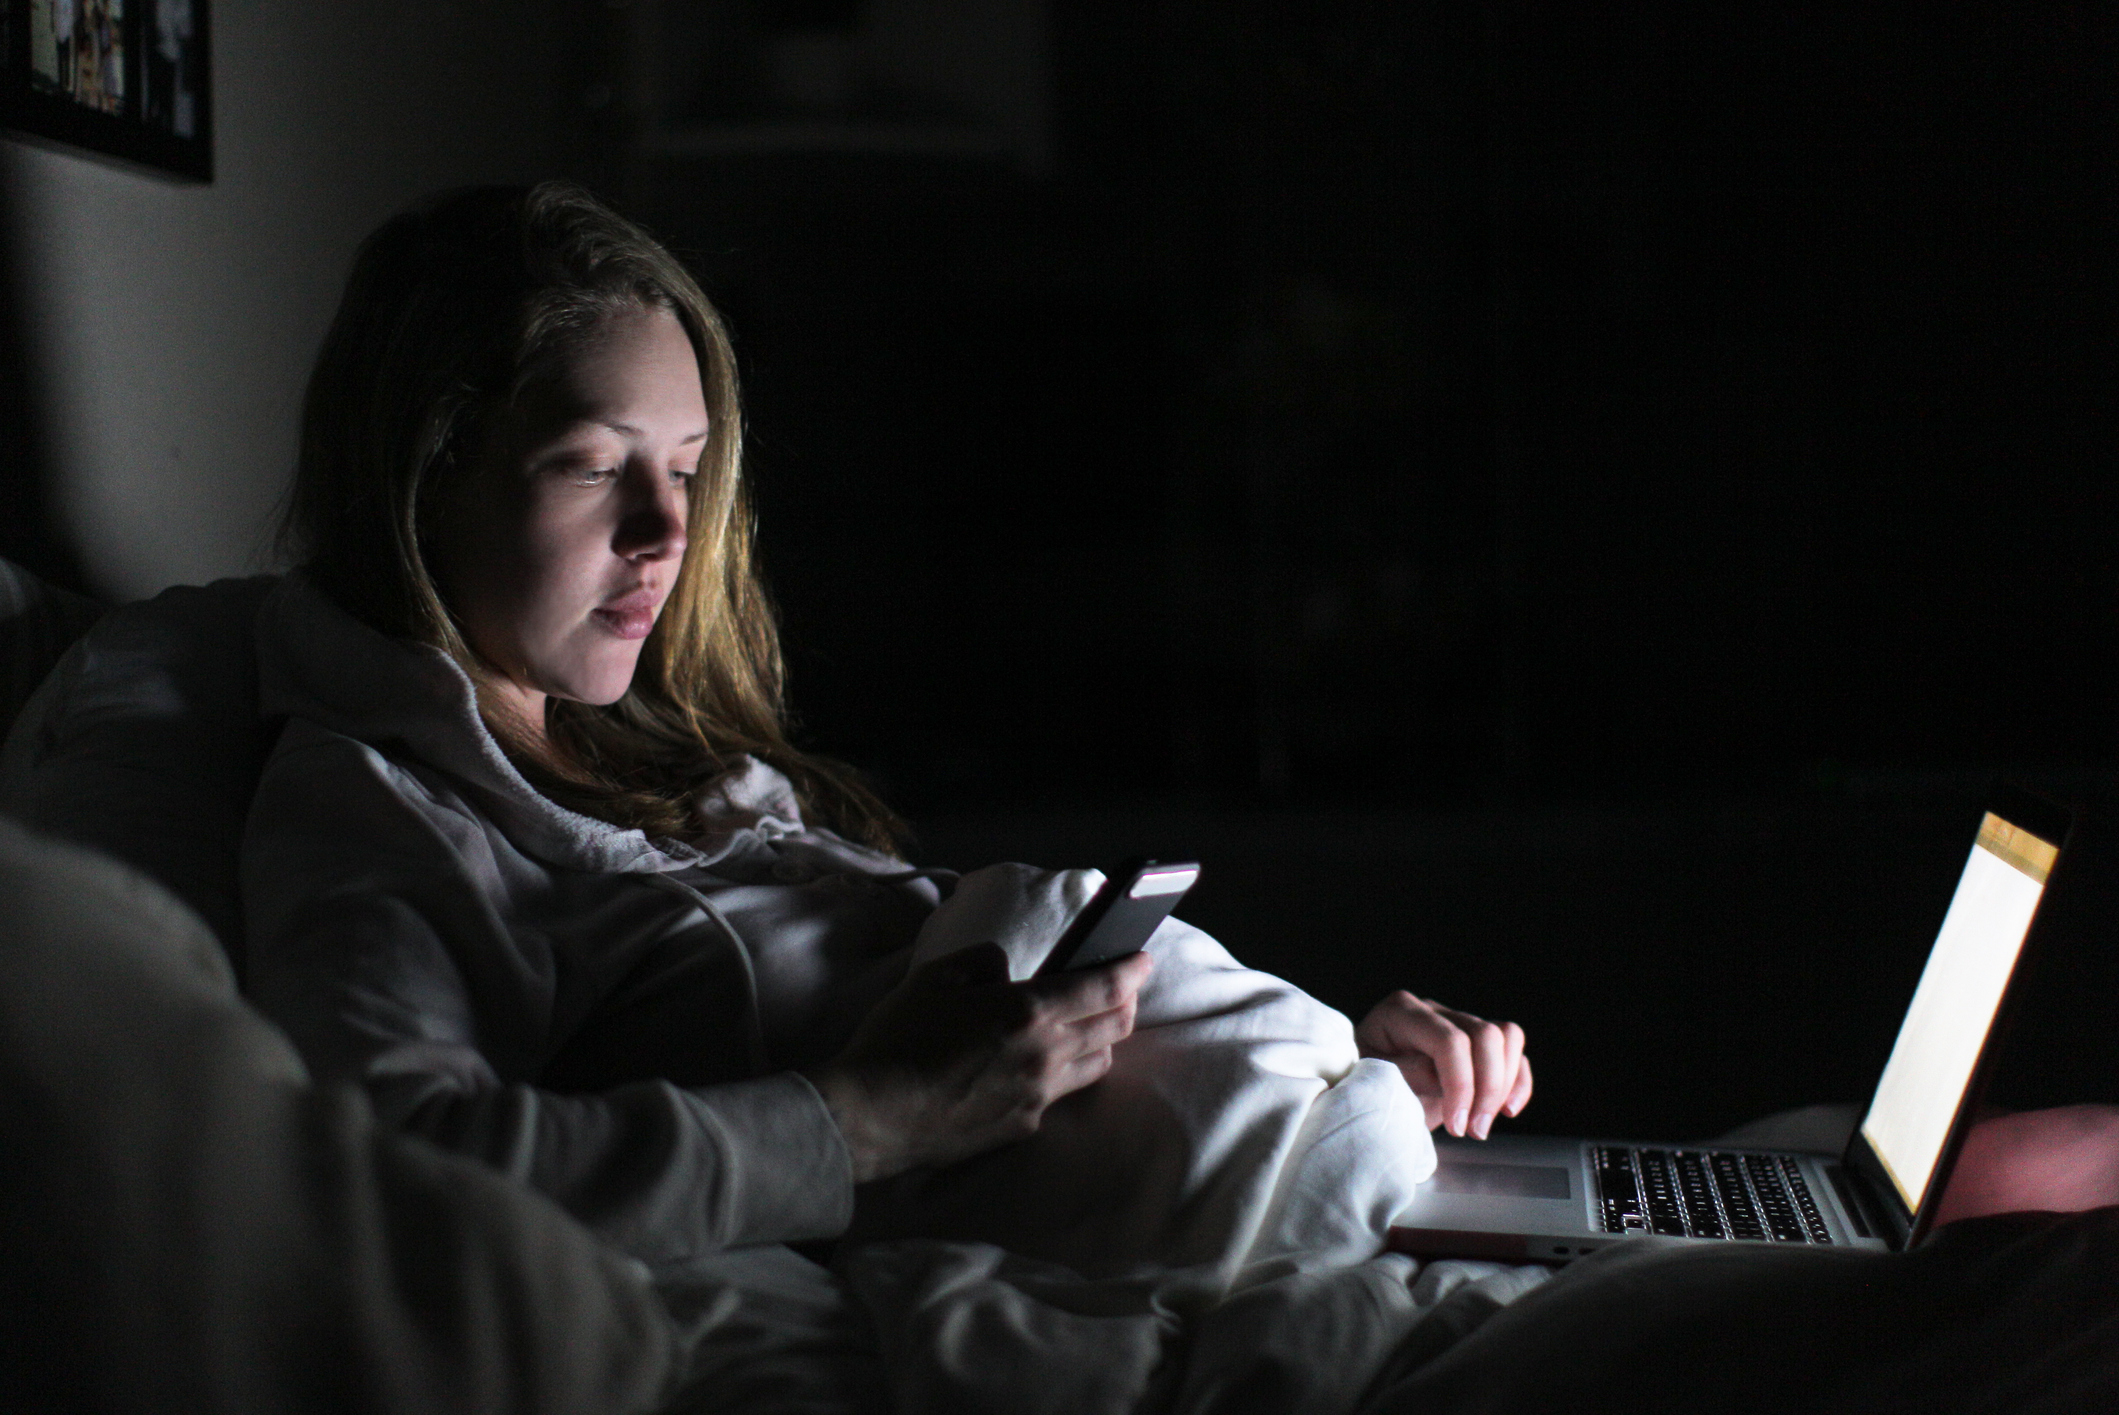 Women on phone and laptop in bed at night